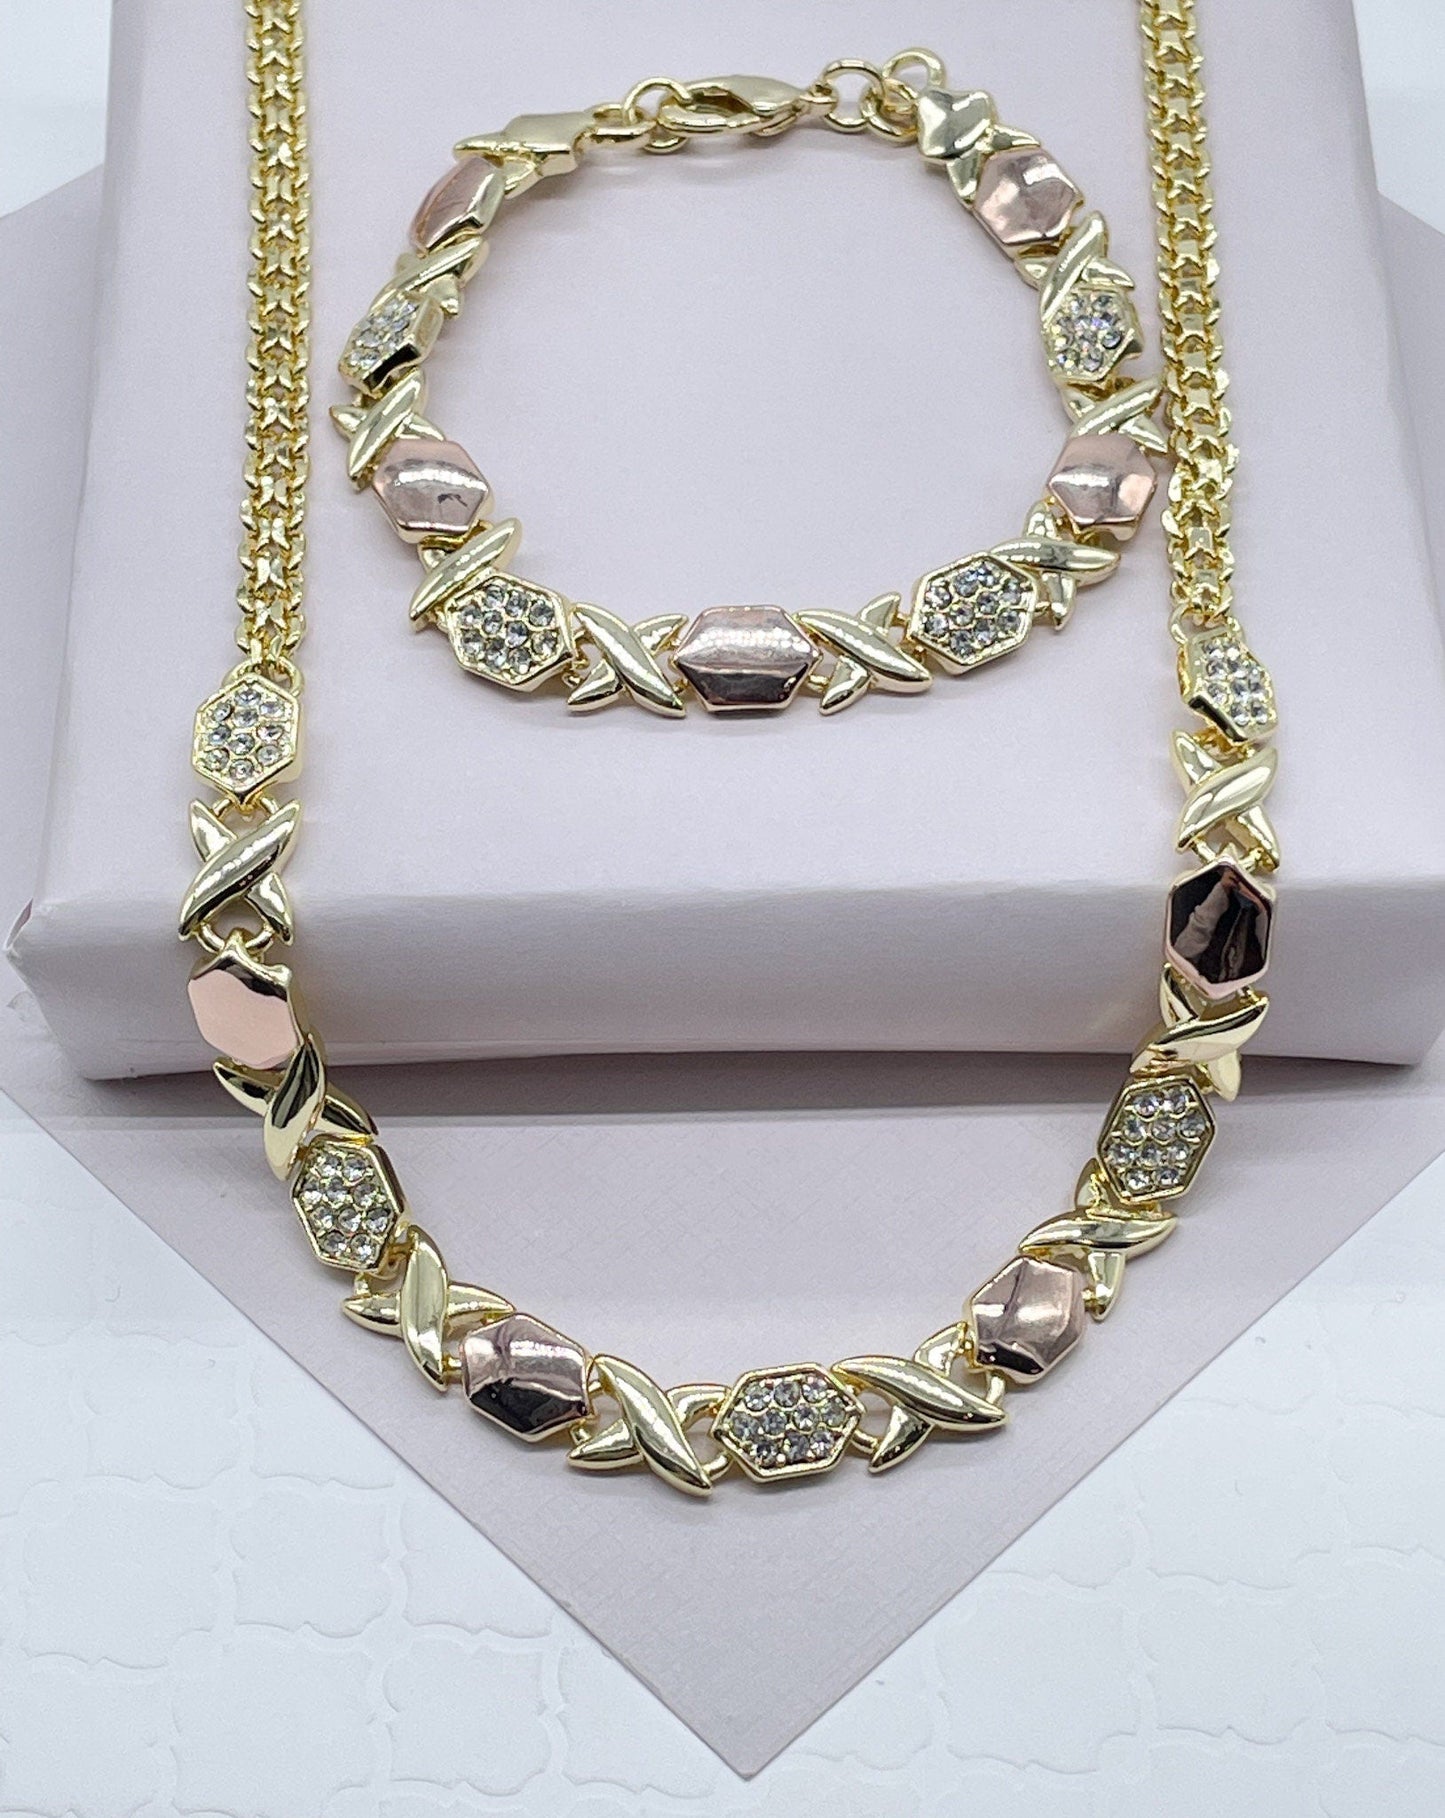 Intricate 18k Gold Layered XOXO Set Featuring Intercalated Cubic Zirconia Link